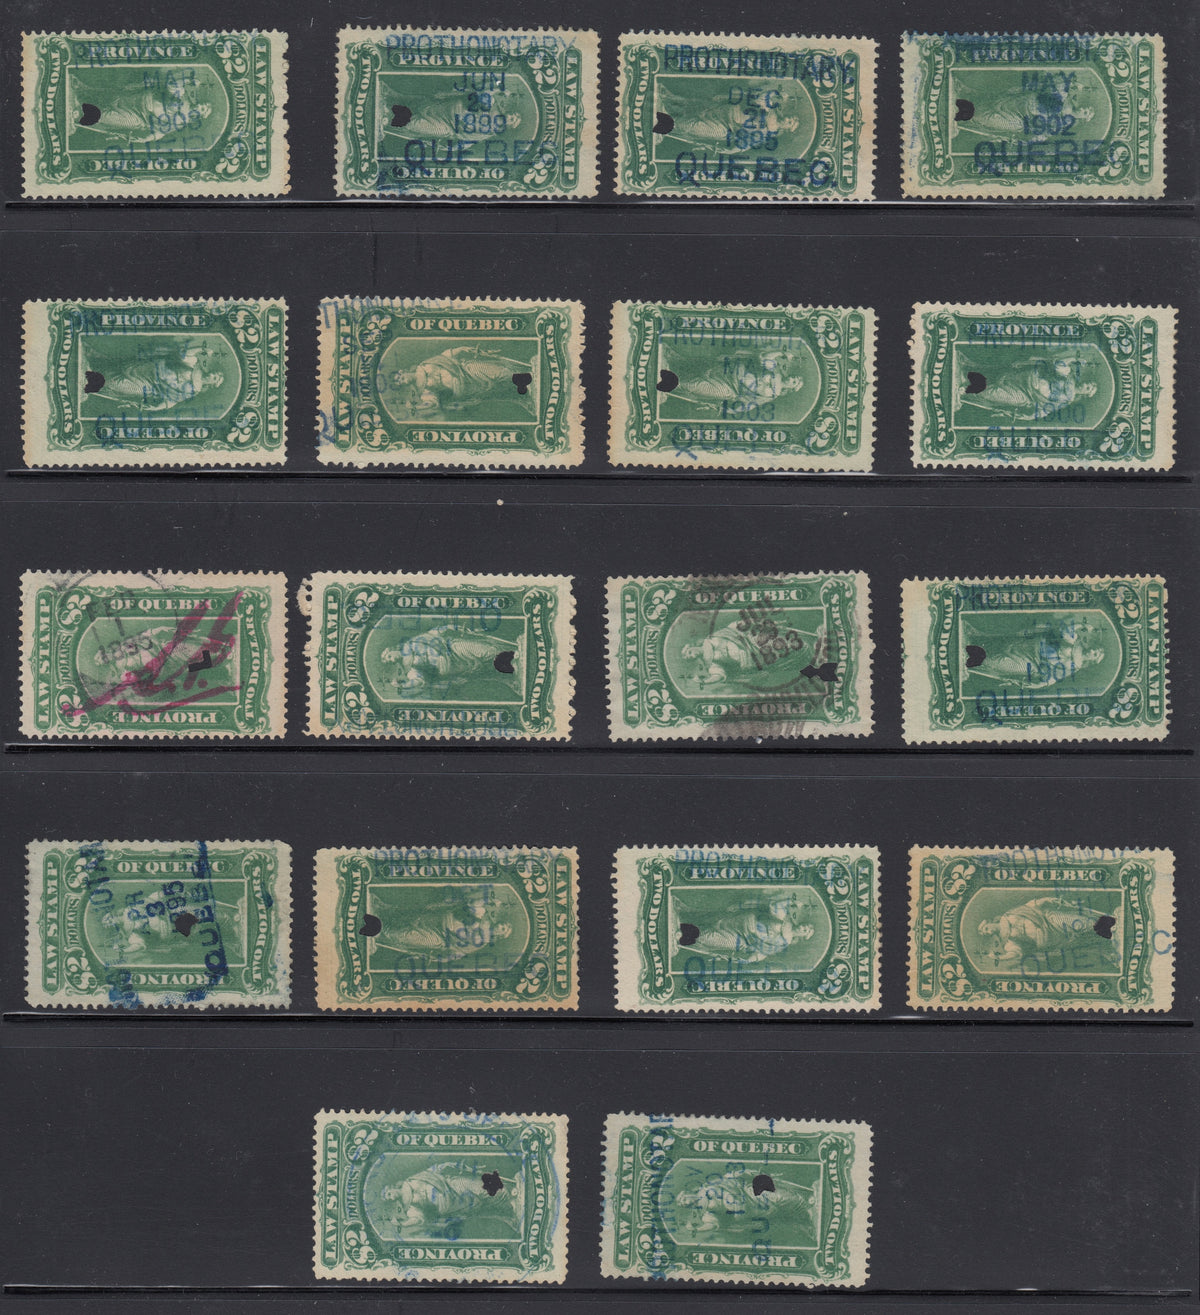 0045QL2109 - QL45 - Used, Group of Dated Cancels